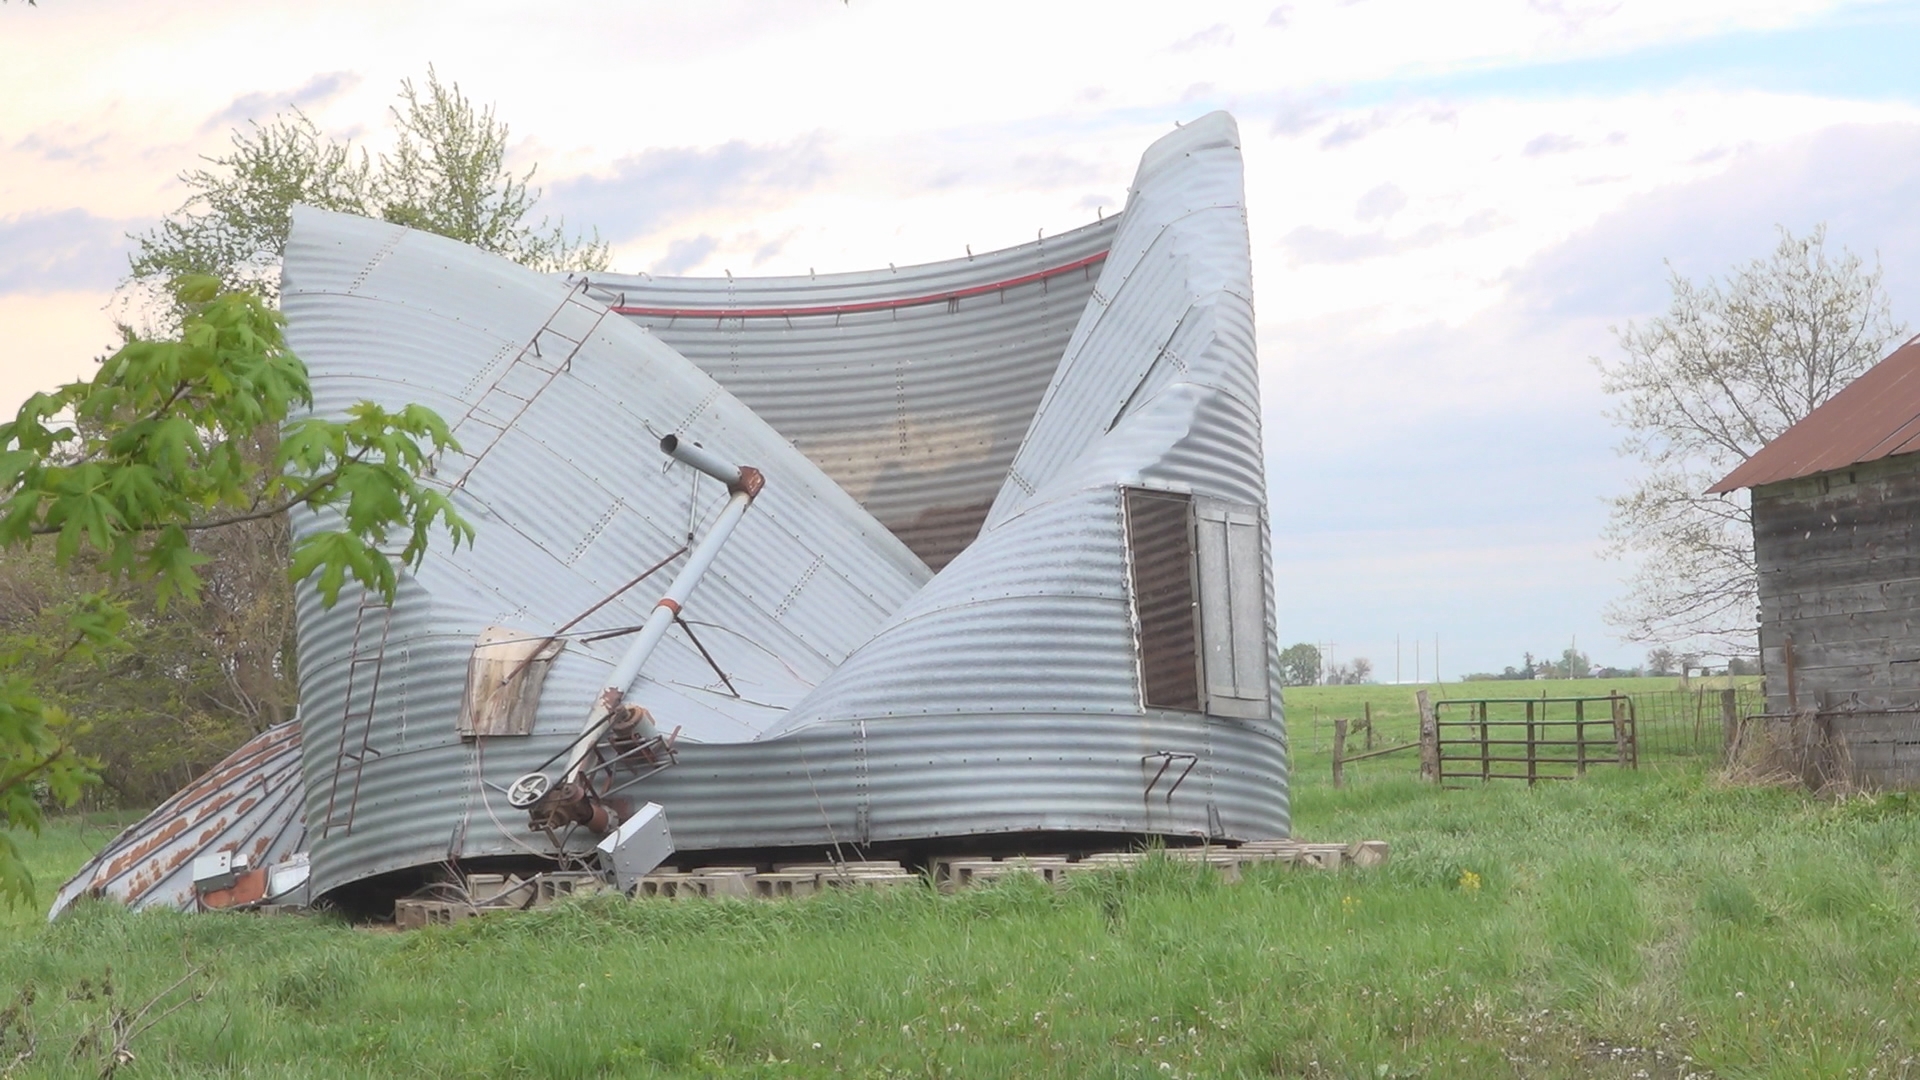 When a tornado passed through Creston Friday night, it left a devastating line of damage, including at the Hartman's family farm.